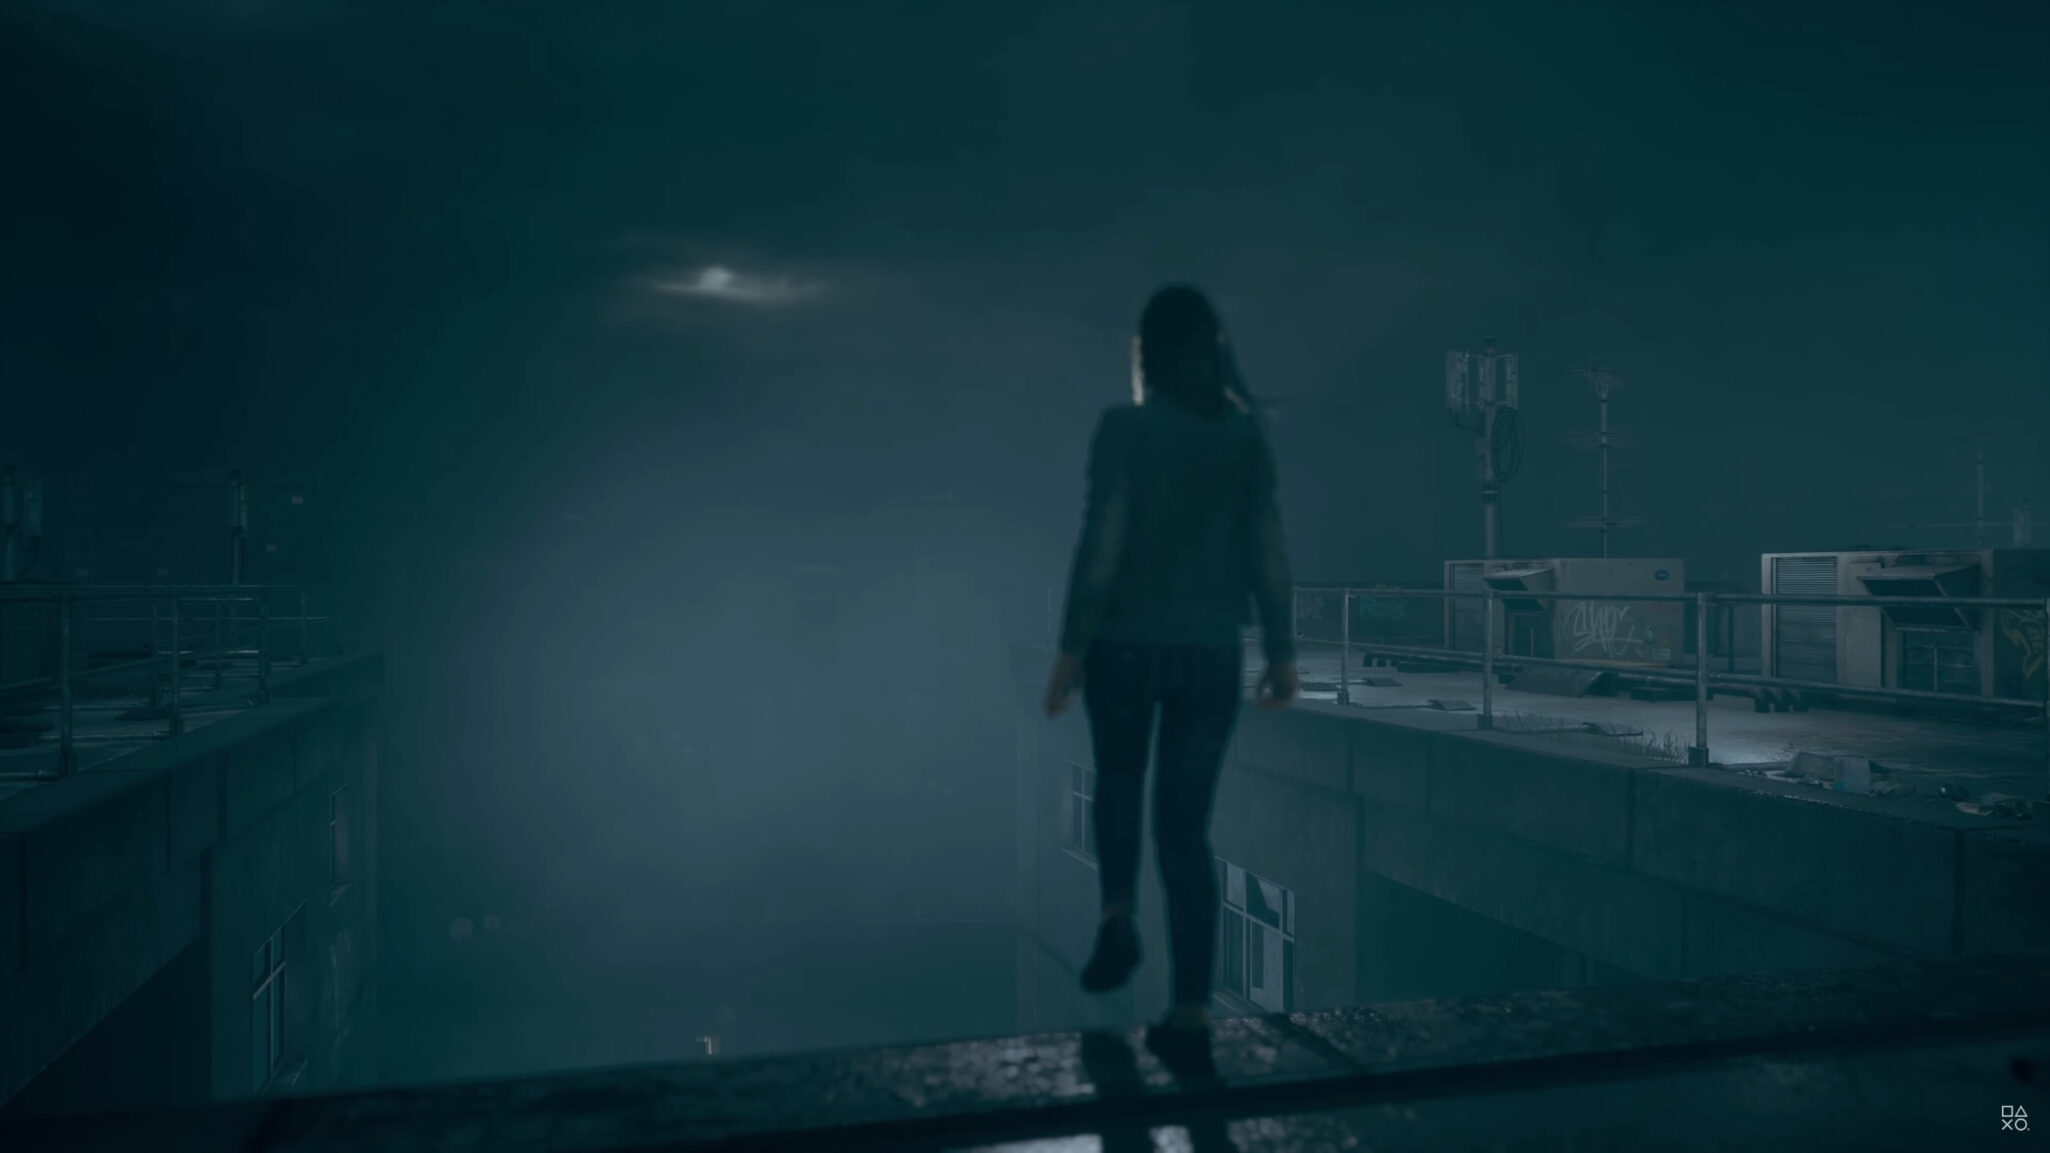 Silent Hill: The Short Message now available free on PS5, new Silent Hill 2  remake trailer revealed – PlayStation.Blog